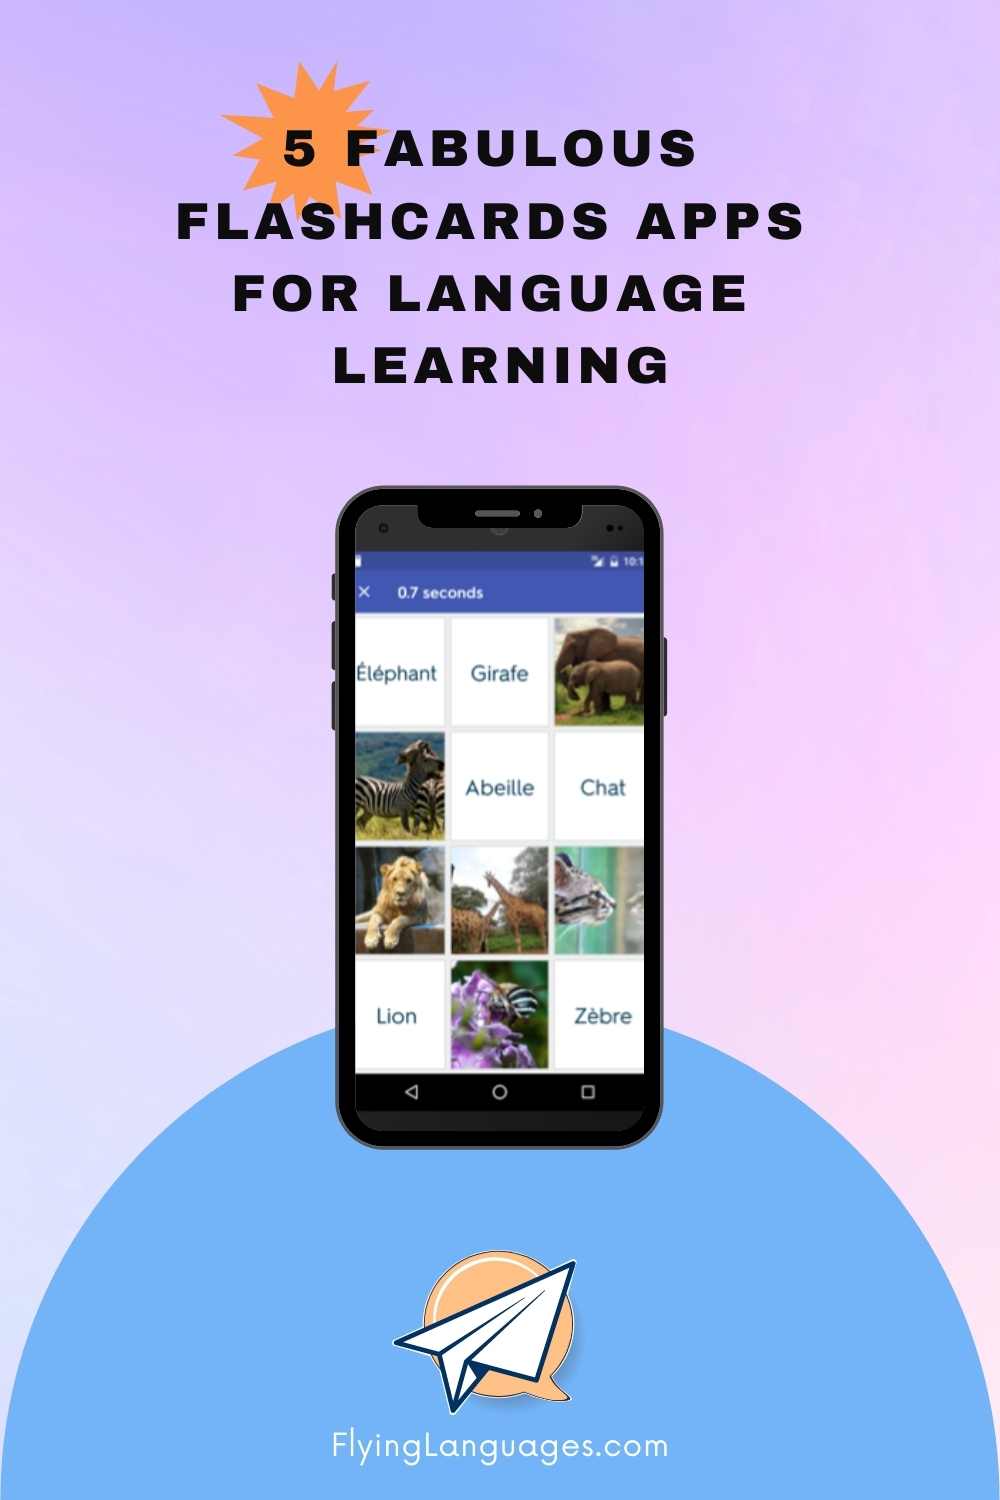 Online App Helps Wi FlashSticks English Flash Cards Advanced Vocabulary Study Cards Make Learning a Game Intermediate | Best Way to Learn to Speak or Improve English No Language Courses Needed